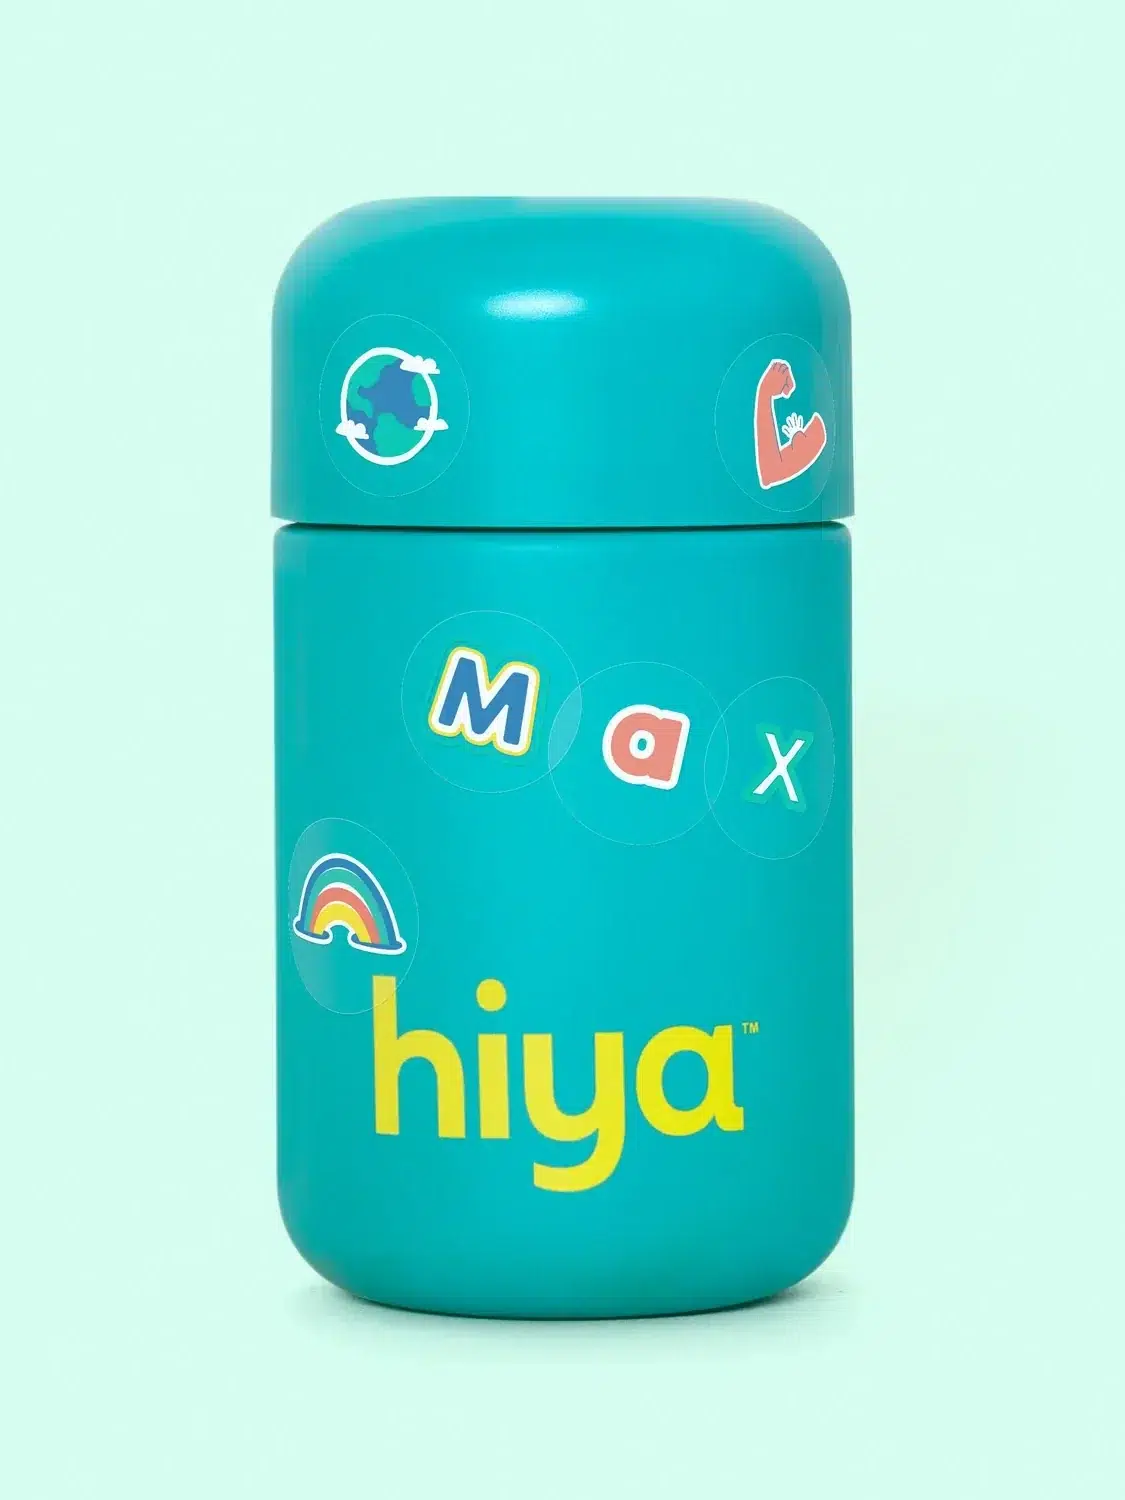 A turquoise children's insulated bottle with stickers and the name "hiya" on it against a light green background.